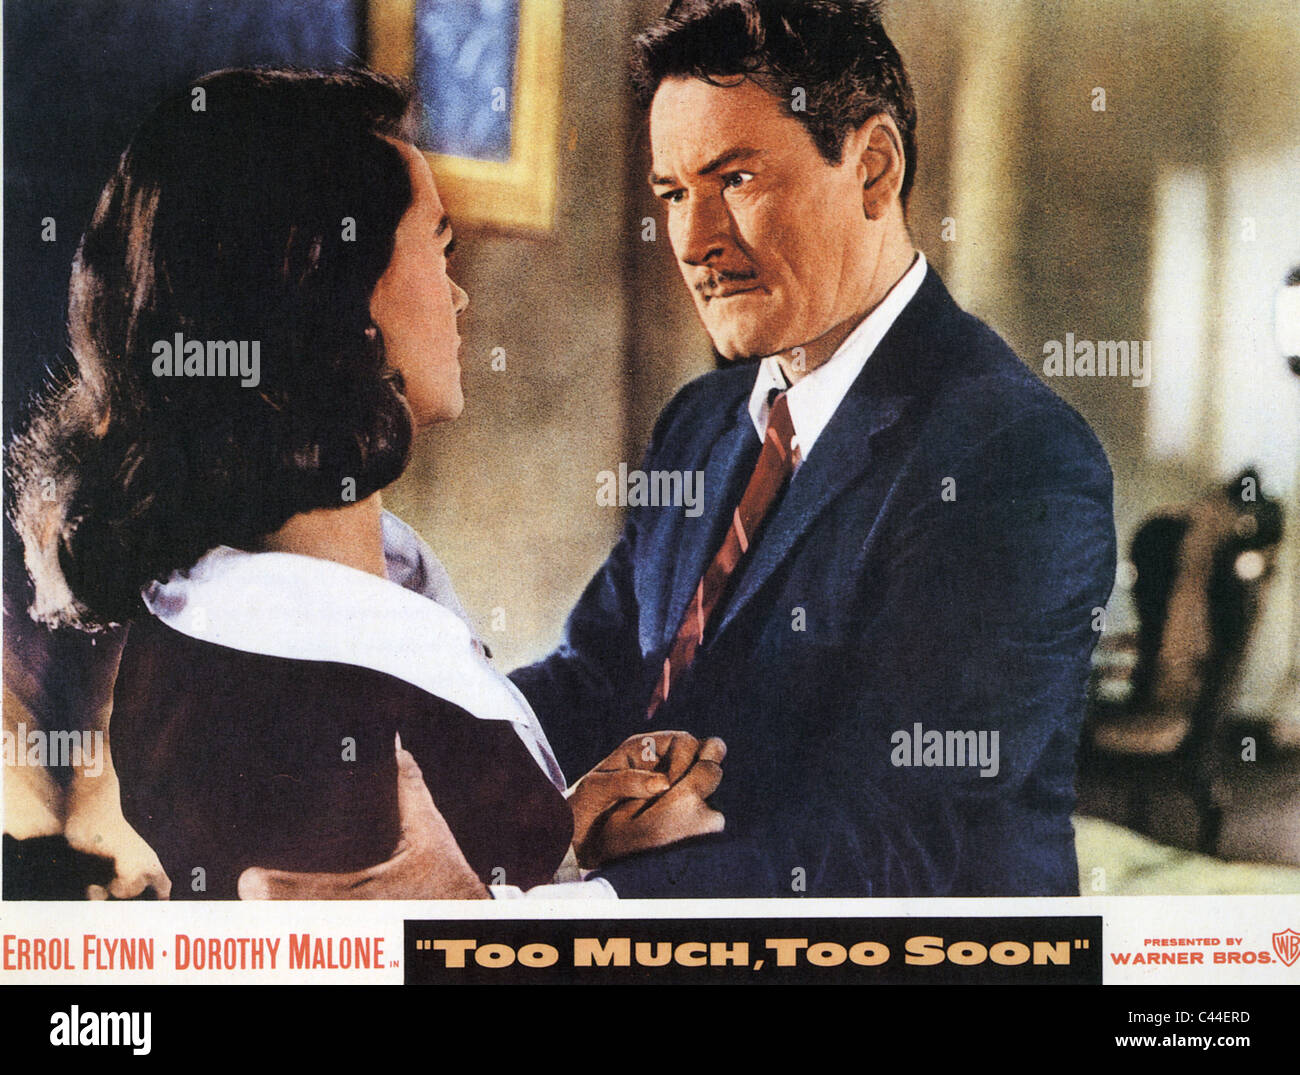 TOO MUCH, TOO SOON 1958 Warner Bros film with Errol Flynn and Dorothy Malone Stock Photo